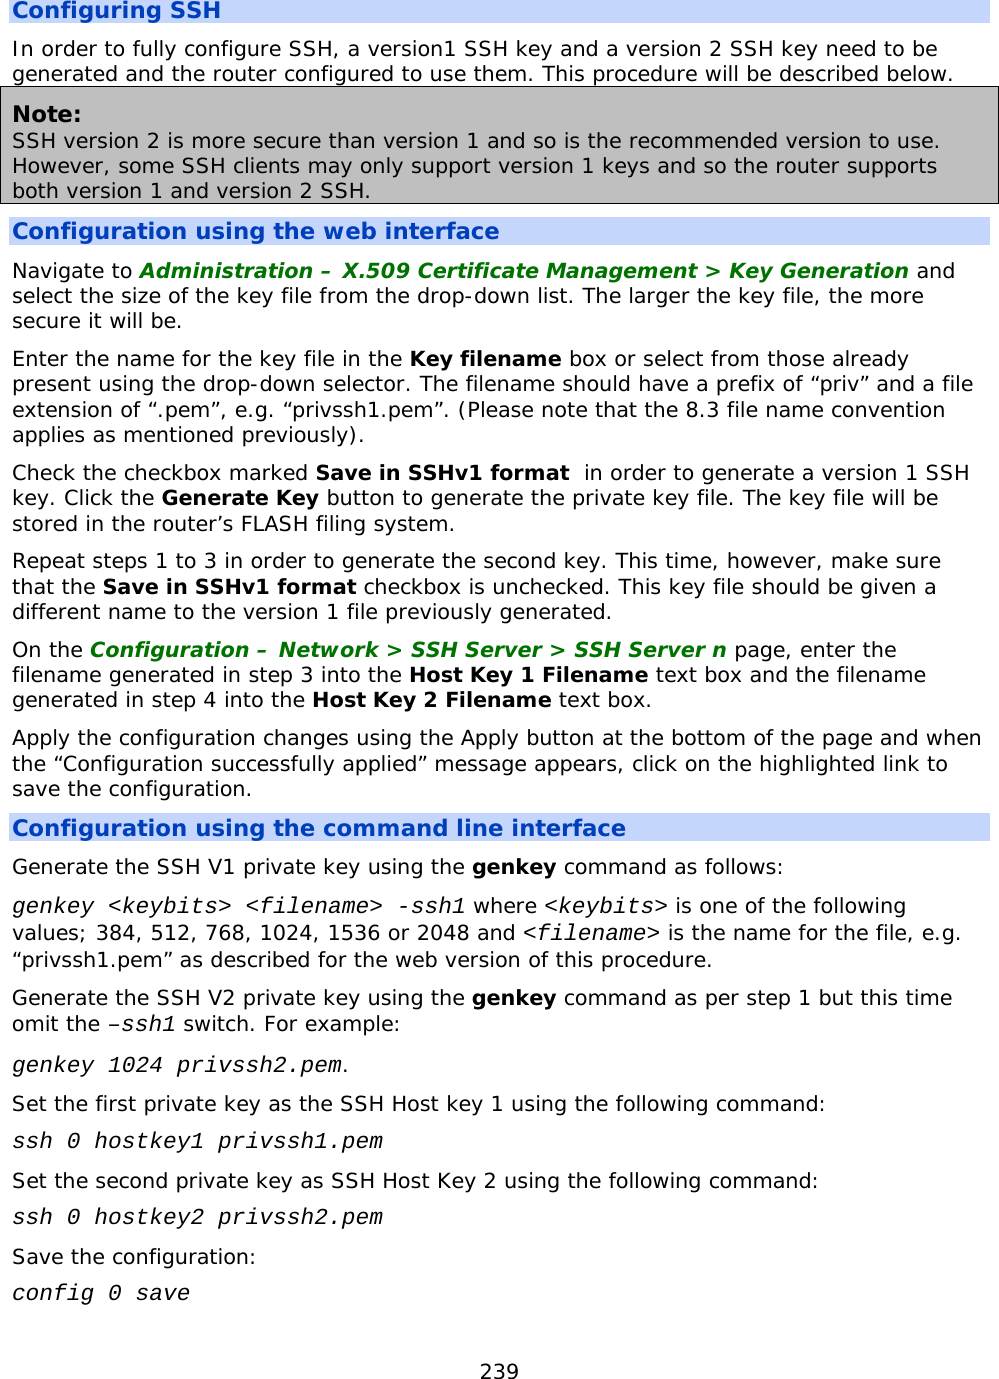 239  Configuring SSH In order to fully configure SSH, a version1 SSH key and a version 2 SSH key need to be generated and the router configured to use them. This procedure will be described below. Note: SSH version 2 is more secure than version 1 and so is the recommended version to use. However, some SSH clients may only support version 1 keys and so the router supports both version 1 and version 2 SSH. Configuration using the web interface Navigate to Administration – X.509 Certificate Management &gt; Key Generation and select the size of the key file from the drop-down list. The larger the key file, the more secure it will be. Enter the name for the key file in the Key filename box or select from those already present using the drop-down selector. The filename should have a prefix of “priv” and a file extension of “.pem”, e.g. “privssh1.pem”. (Please note that the 8.3 file name convention applies as mentioned previously). Check the checkbox marked Save in SSHv1 format  in order to generate a version 1 SSH key. Click the Generate Key button to generate the private key file. The key file will be stored in the router’s FLASH filing system. Repeat steps 1 to 3 in order to generate the second key. This time, however, make sure that the Save in SSHv1 format checkbox is unchecked. This key file should be given a different name to the version 1 file previously generated. On the Configuration – Network &gt; SSH Server &gt; SSH Server n page, enter the filename generated in step 3 into the Host Key 1 Filename text box and the filename generated in step 4 into the Host Key 2 Filename text box. Apply the configuration changes using the Apply button at the bottom of the page and when the “Configuration successfully applied” message appears, click on the highlighted link to save the configuration. Configuration using the command line interface Generate the SSH V1 private key using the genkey command as follows: genkey &lt;keybits&gt; &lt;filename&gt; -ssh1 where &lt;keybits&gt; is one of the following values; 384, 512, 768, 1024, 1536 or 2048 and &lt;filename&gt; is the name for the file, e.g. “privssh1.pem” as described for the web version of this procedure. Generate the SSH V2 private key using the genkey command as per step 1 but this time omit the –ssh1 switch. For example: genkey 1024 privssh2.pem. Set the first private key as the SSH Host key 1 using the following command: ssh 0 hostkey1 privssh1.pem Set the second private key as SSH Host Key 2 using the following command: ssh 0 hostkey2 privssh2.pem Save the configuration: config 0 save 